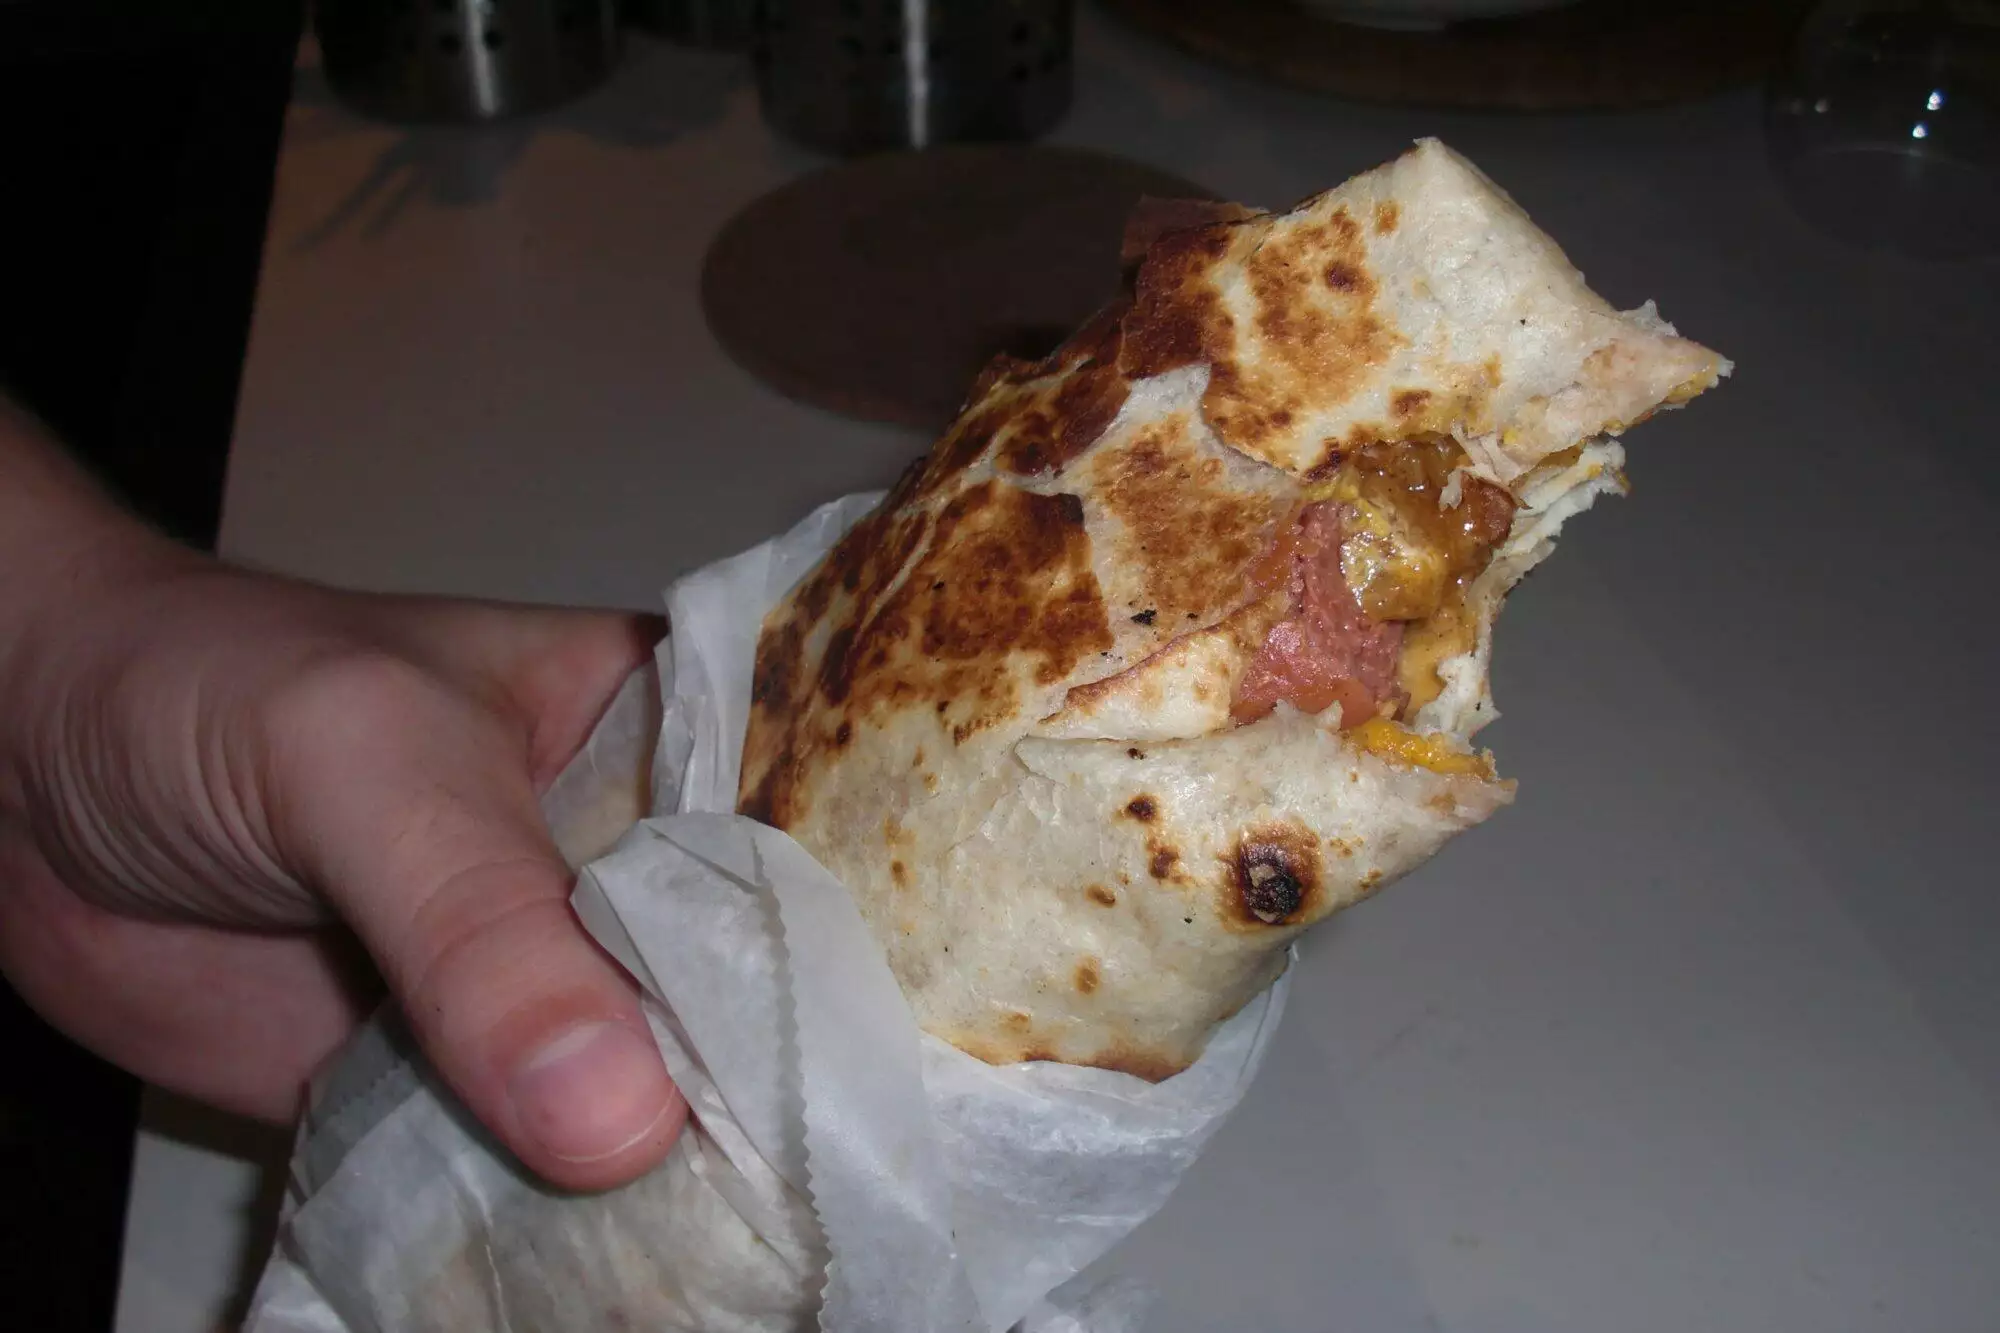 burrito dog from dogma grill upper east side Miami